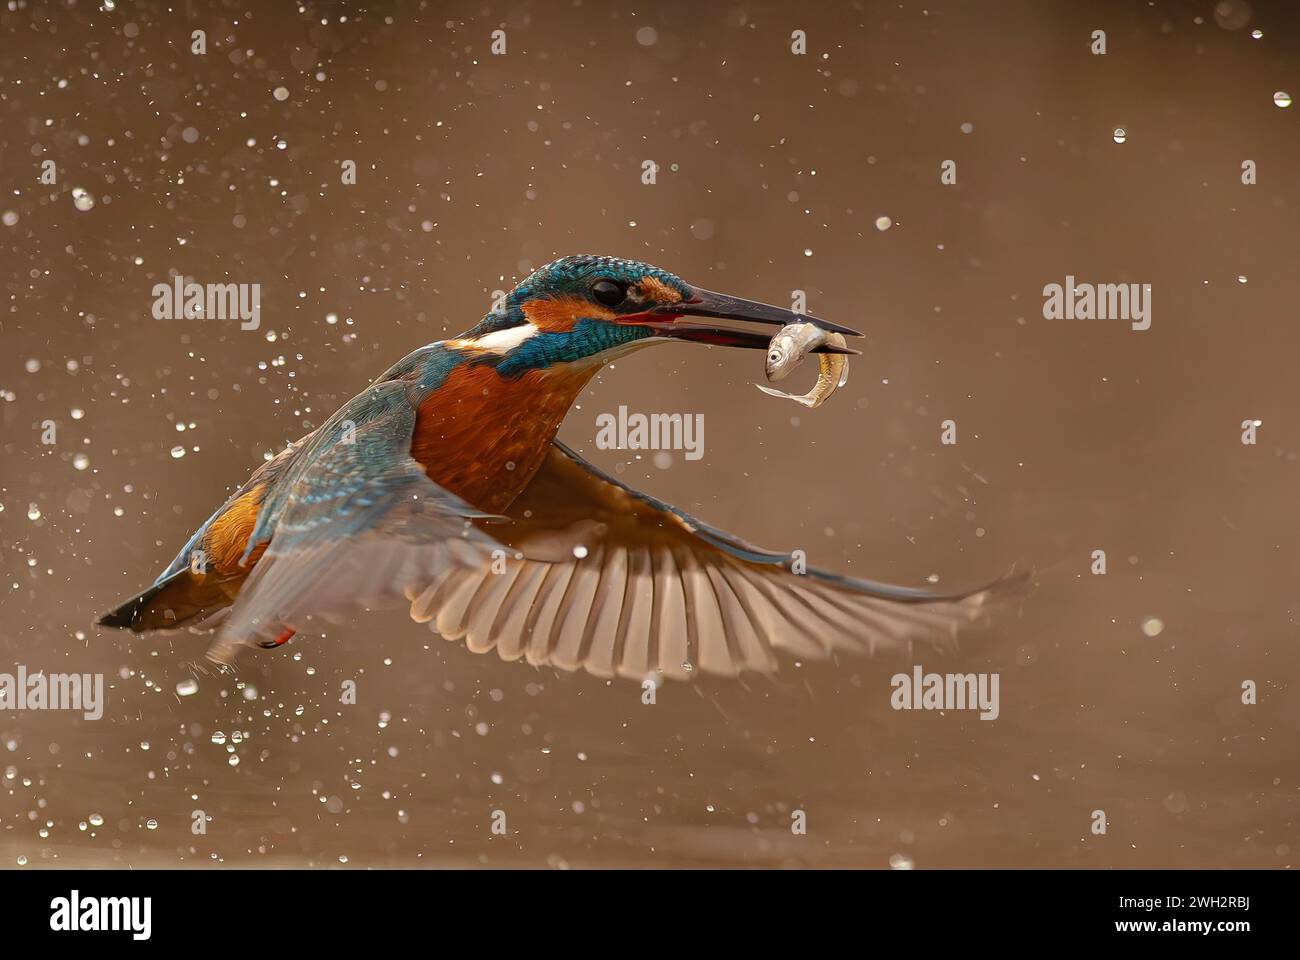 beautiful kingfisher flies away with the fish in its mouth after fishing Stock Photo